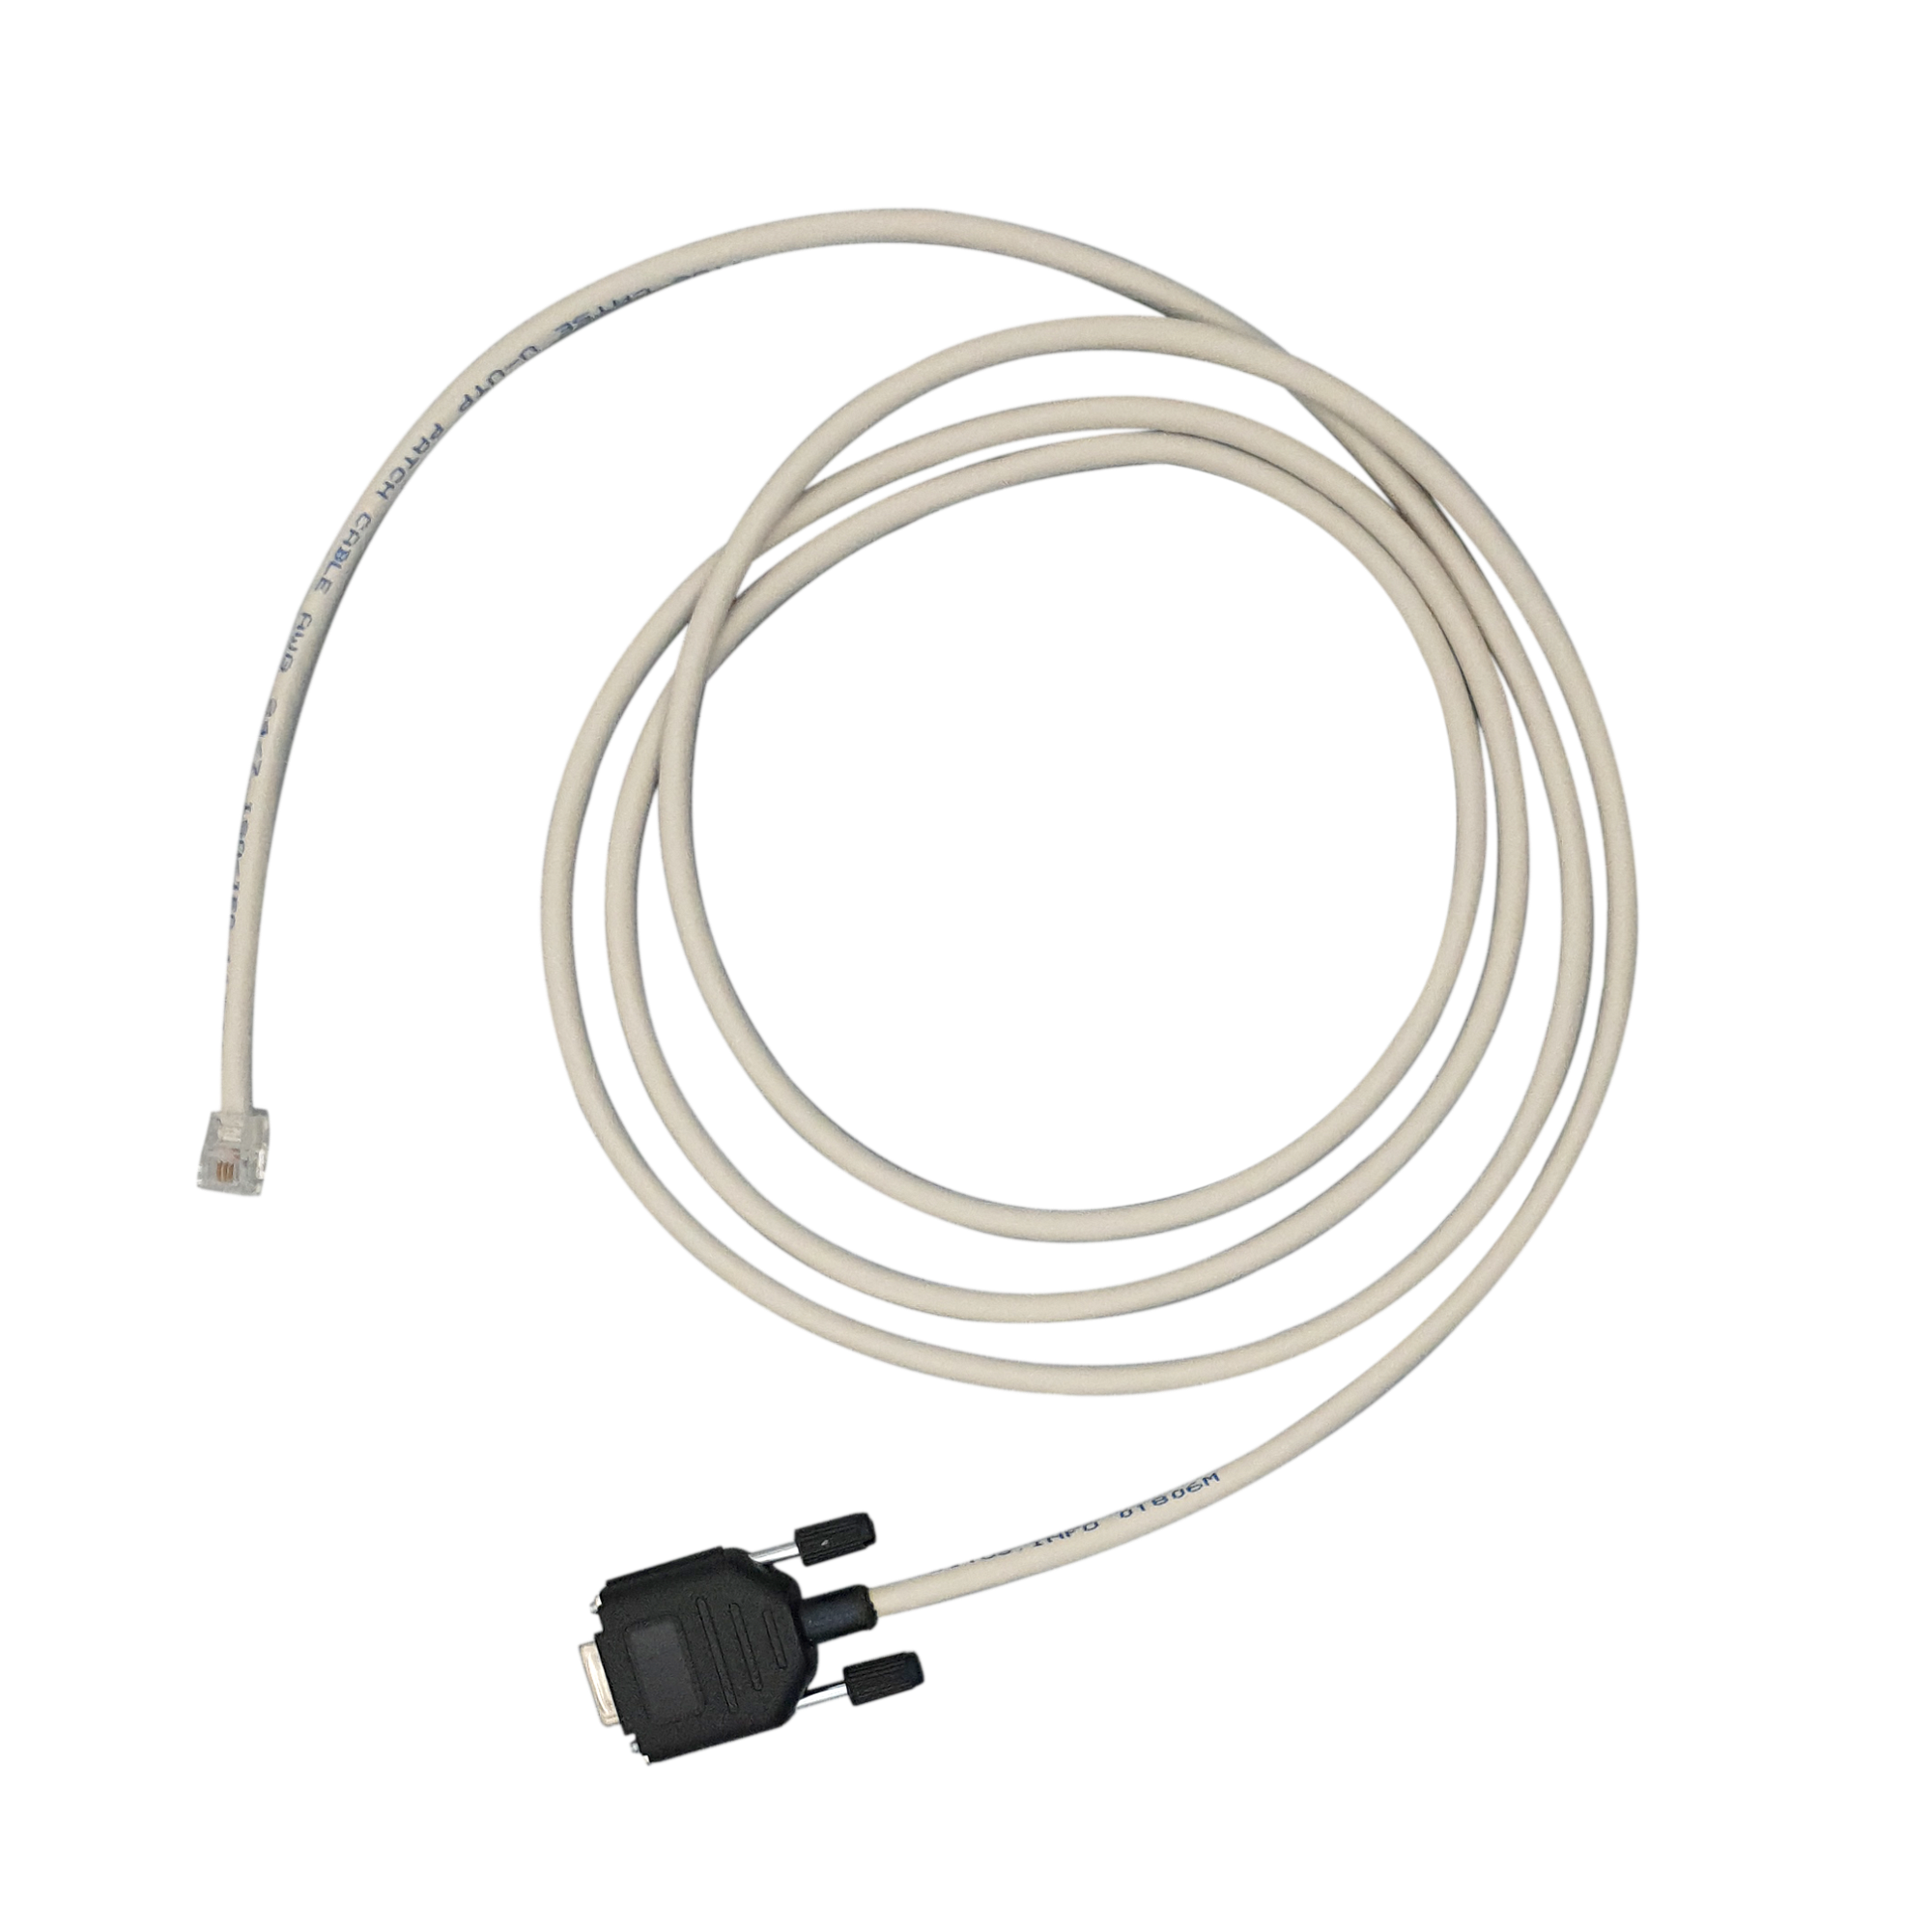 Serial connection cable (RS-485) for Kinco CV20 frequency converter and Kinco HMI